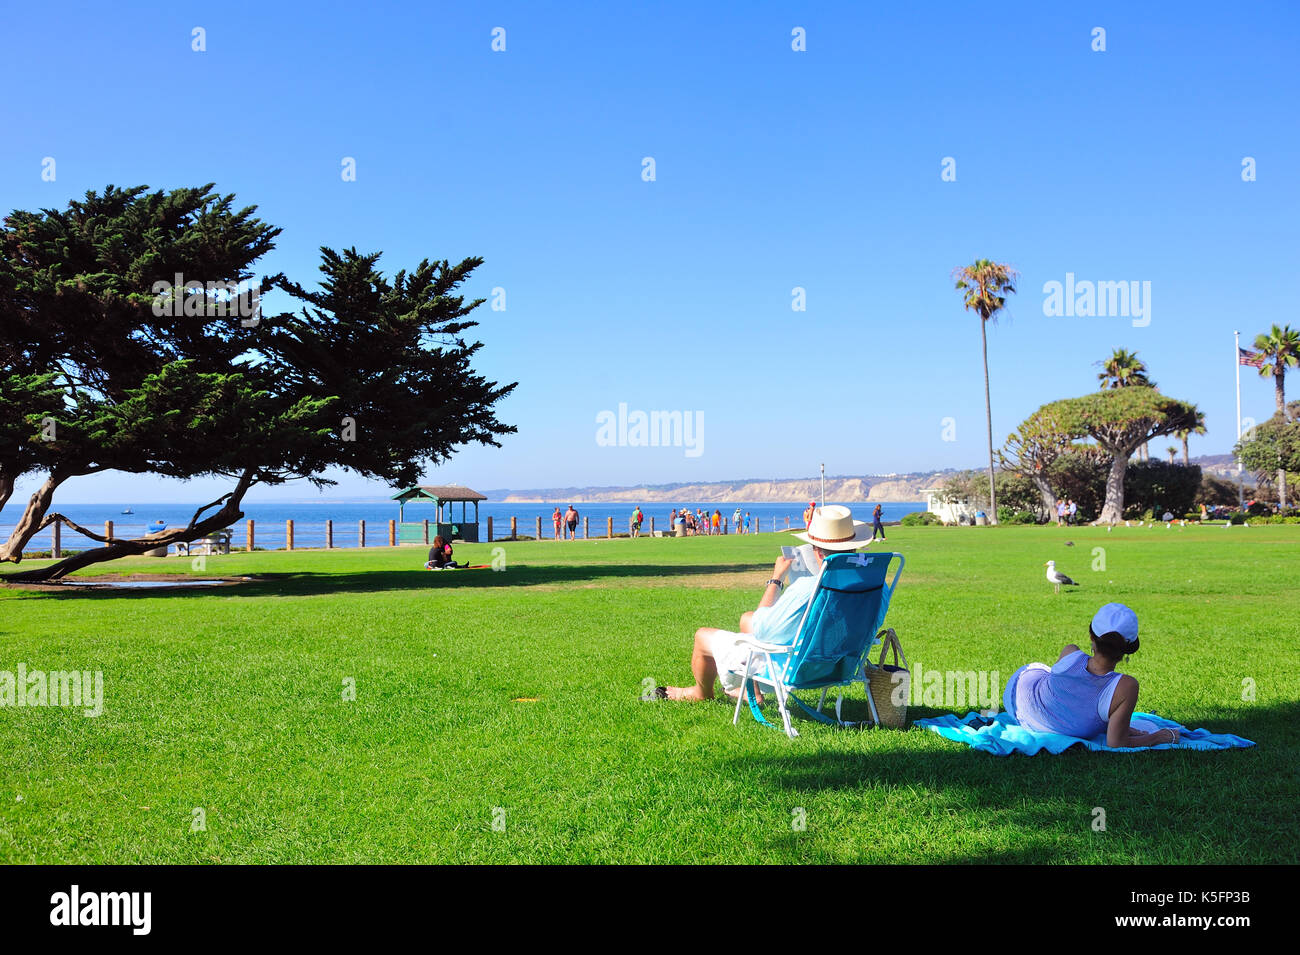 San Diego,United States - on: July 30th, 2013:La Jolla Cove in San Diego during a sunny summer day. Stock Photo